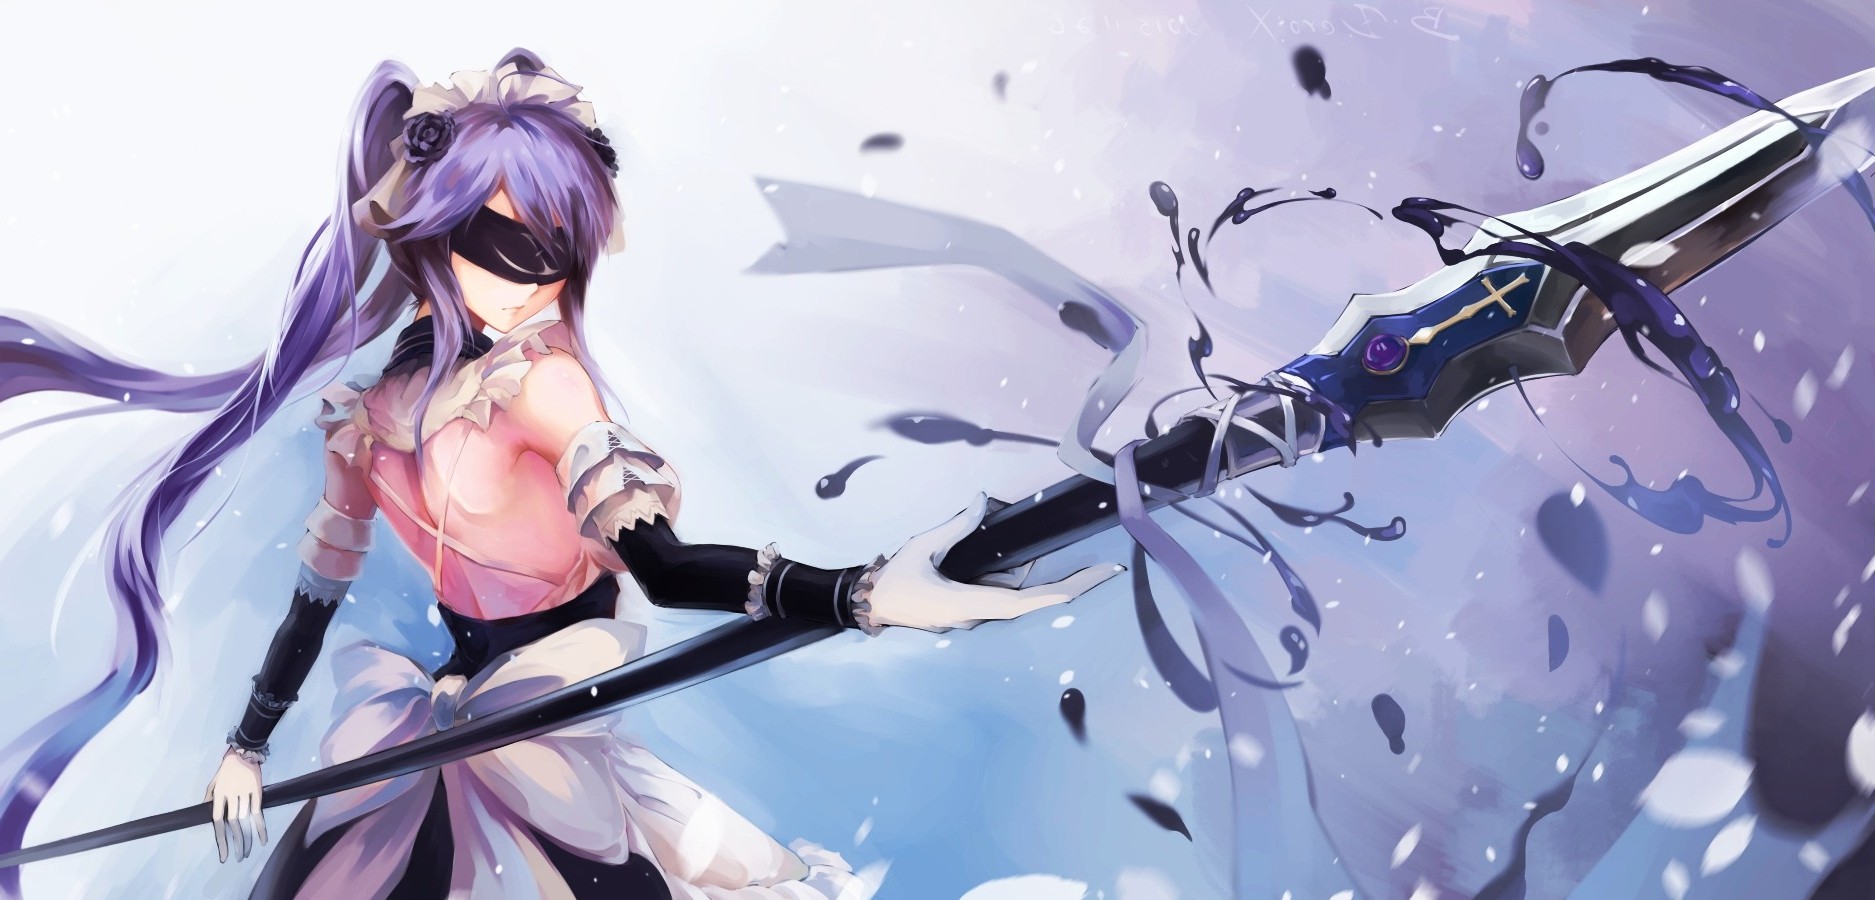 fantasy Art, Original Characters, Twintails, Spear, Weapon, Elbow Gloves, Anime Girls, Blindfold Wallpaper